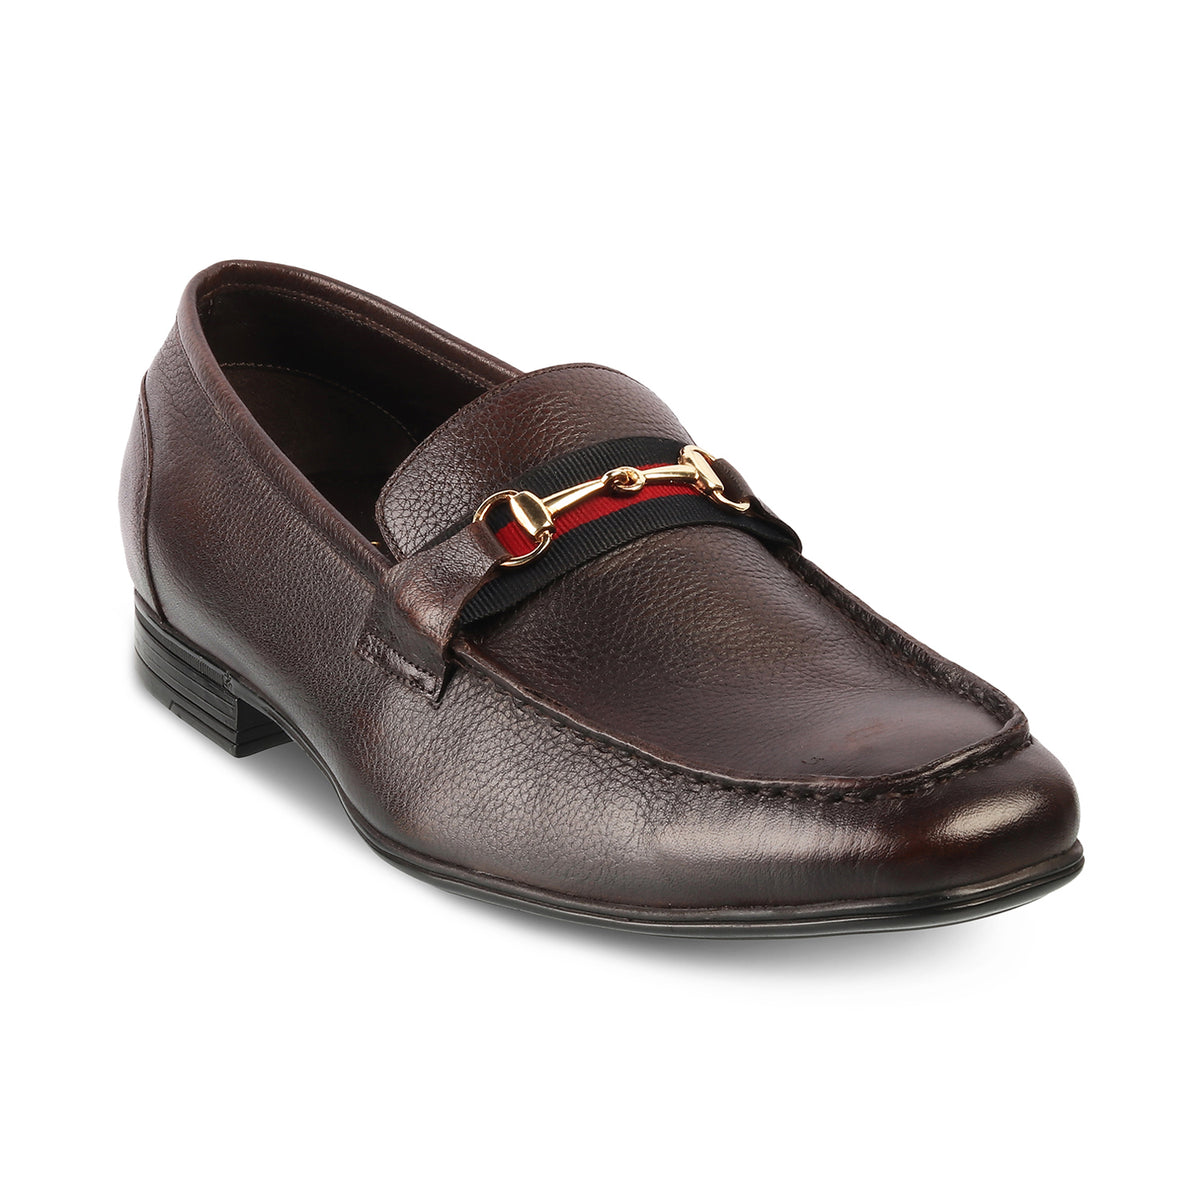 The Suchi Brown Mens Leather Loafers - Tresmode